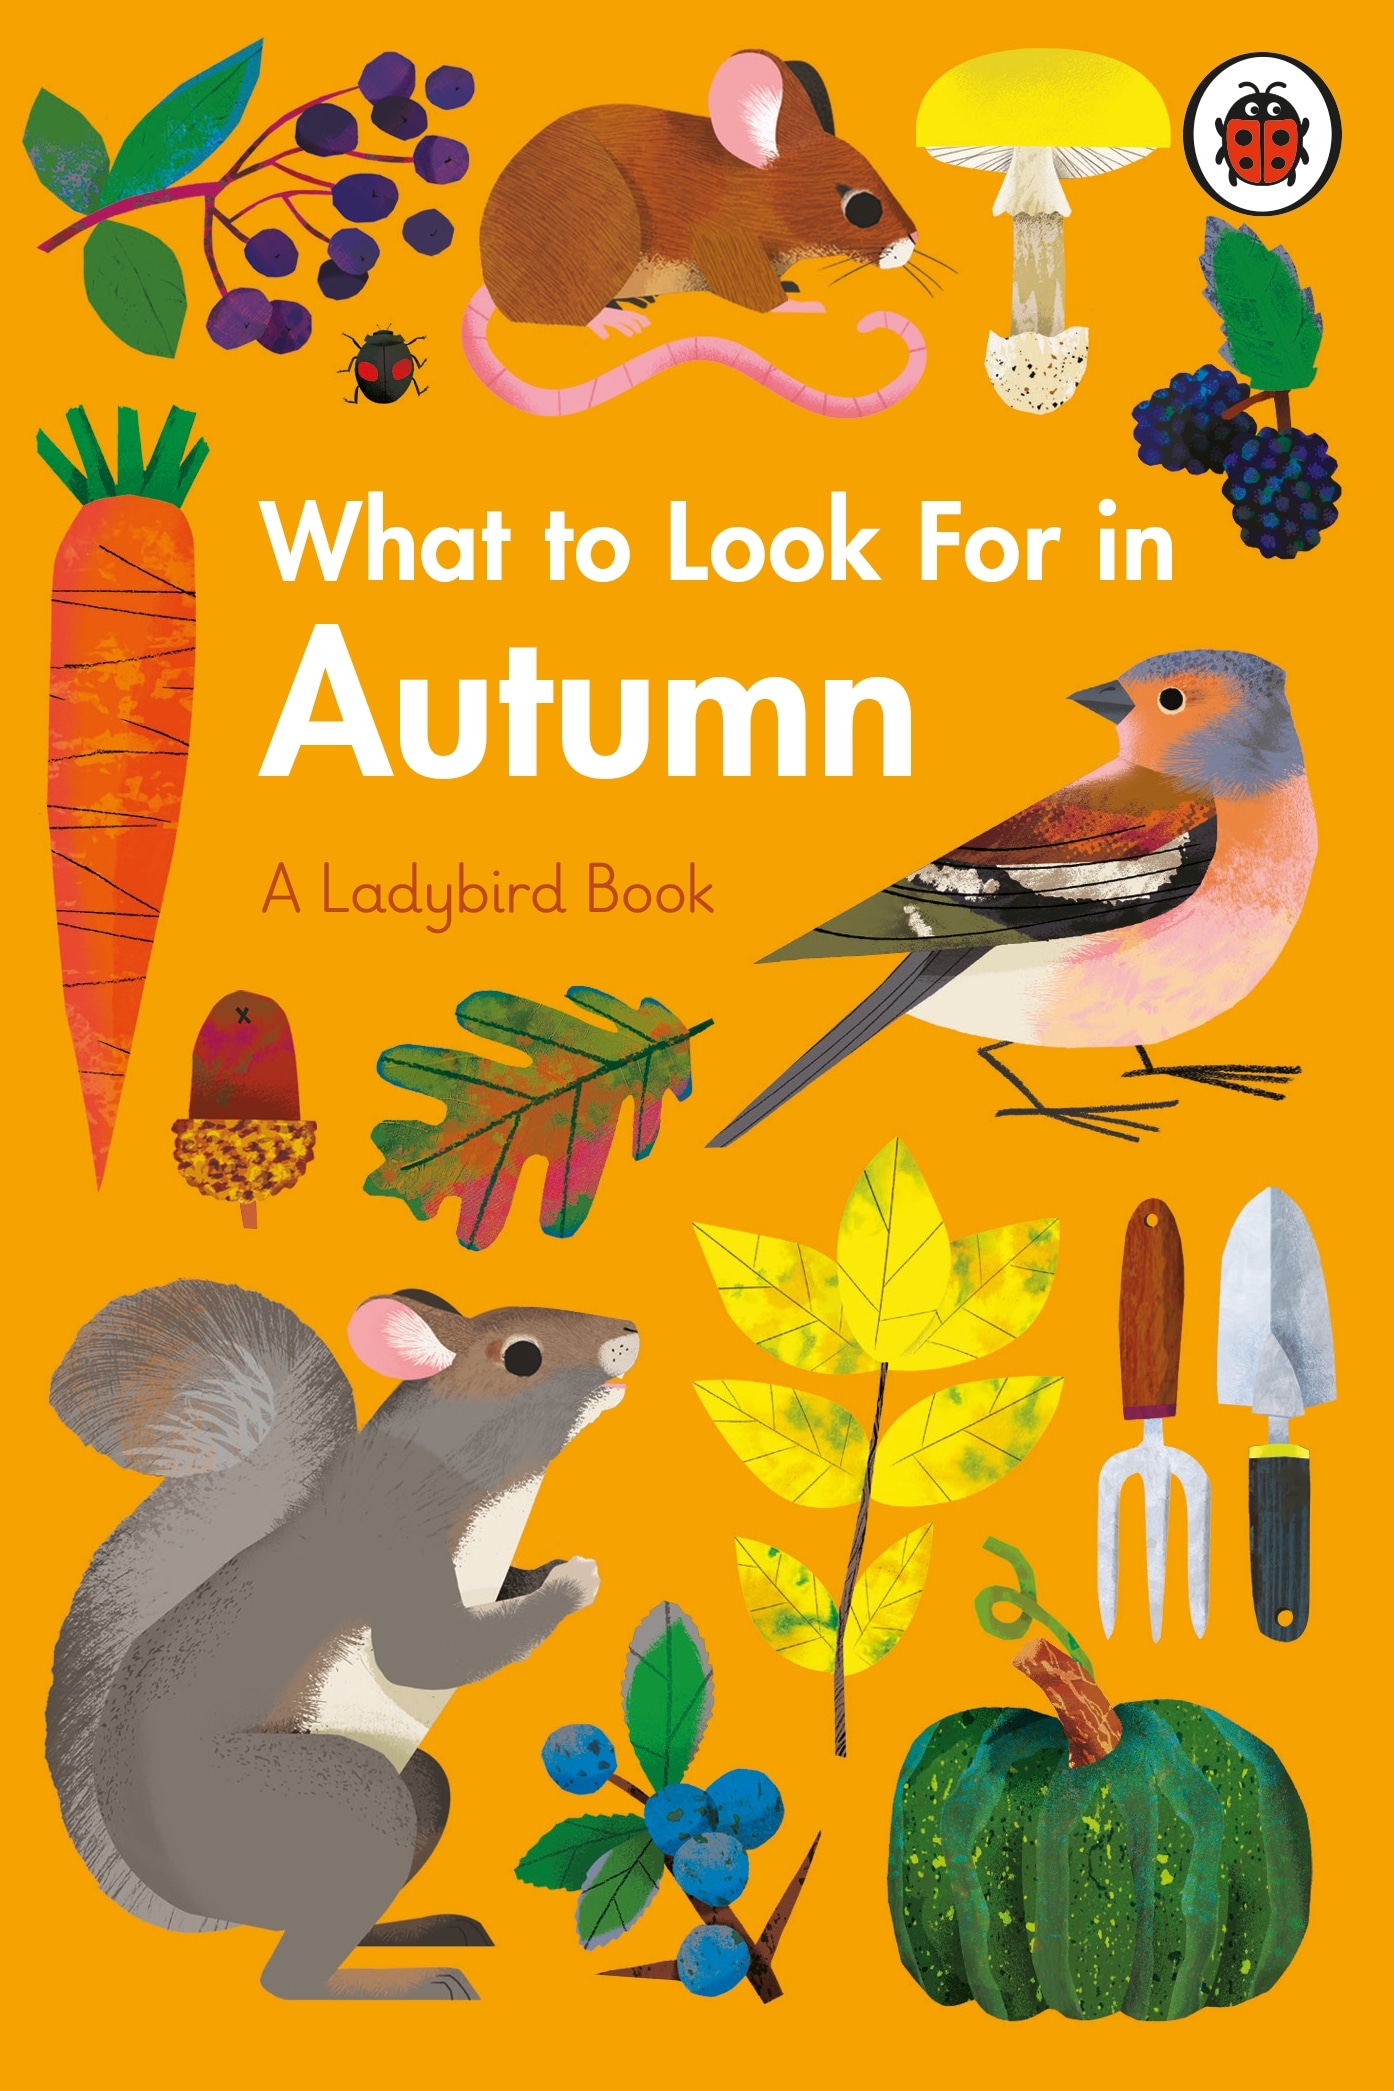 Book “What to Look For in Autumn” by Elizabeth Jenner, Natasha Durley — January 21, 2021